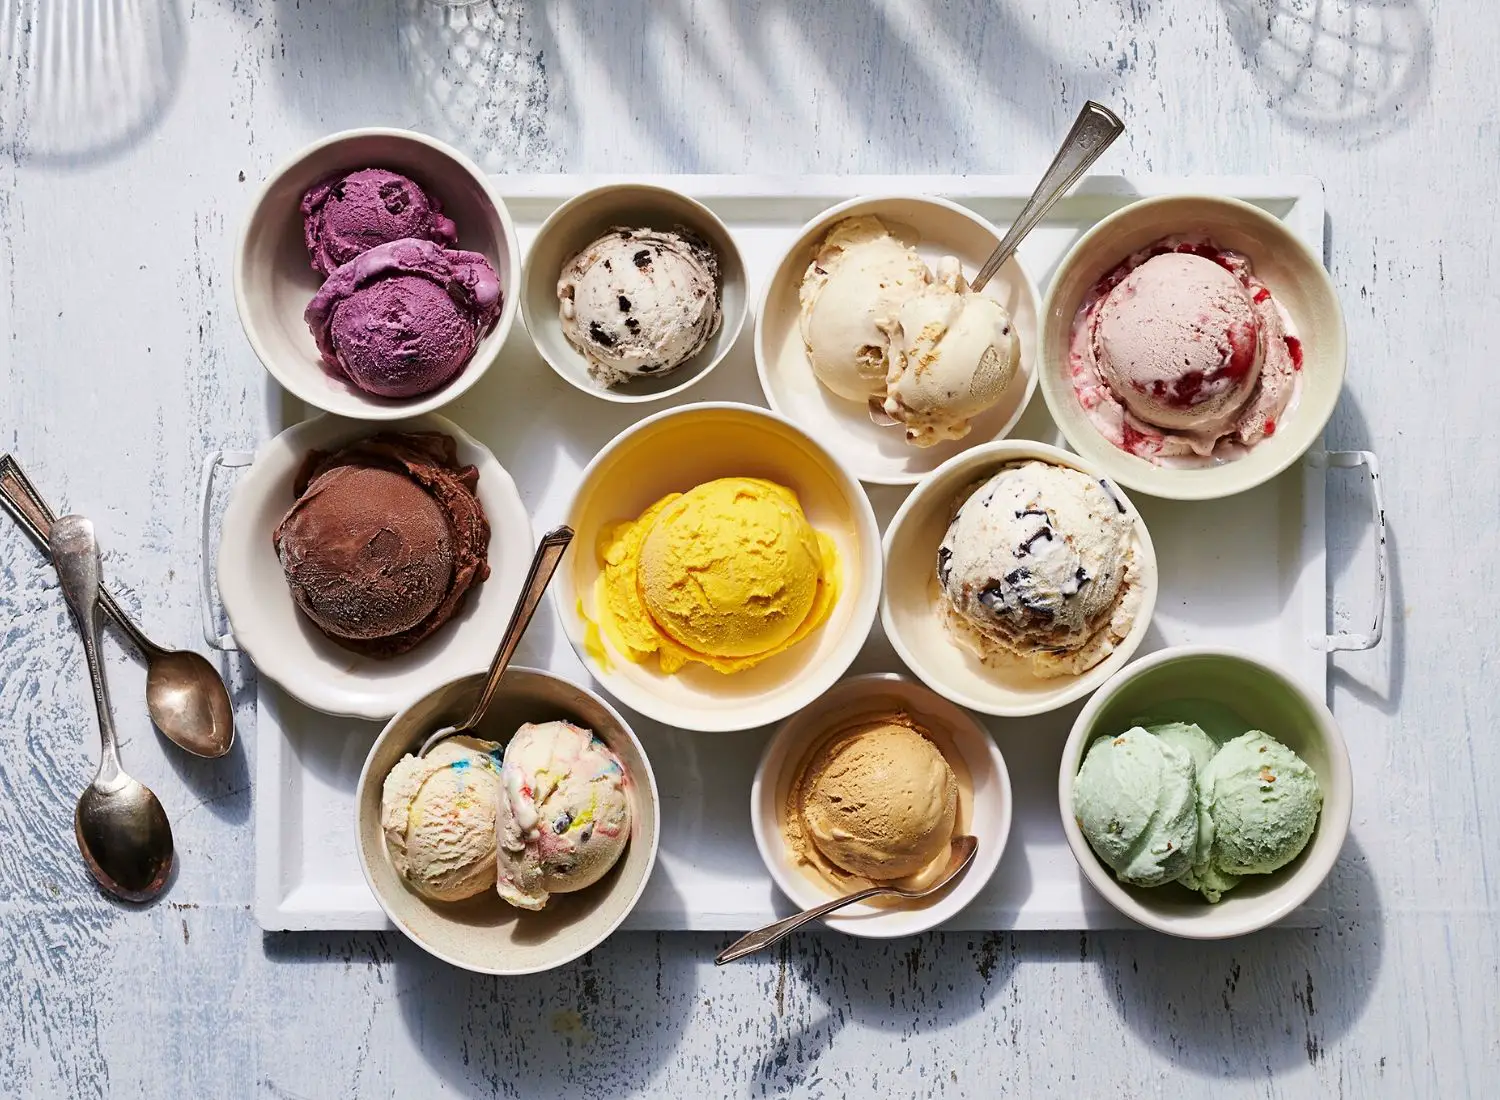 Top 15 Weirdest Ice cream Flavors You Should Try Ice Cream Flavors Pictures